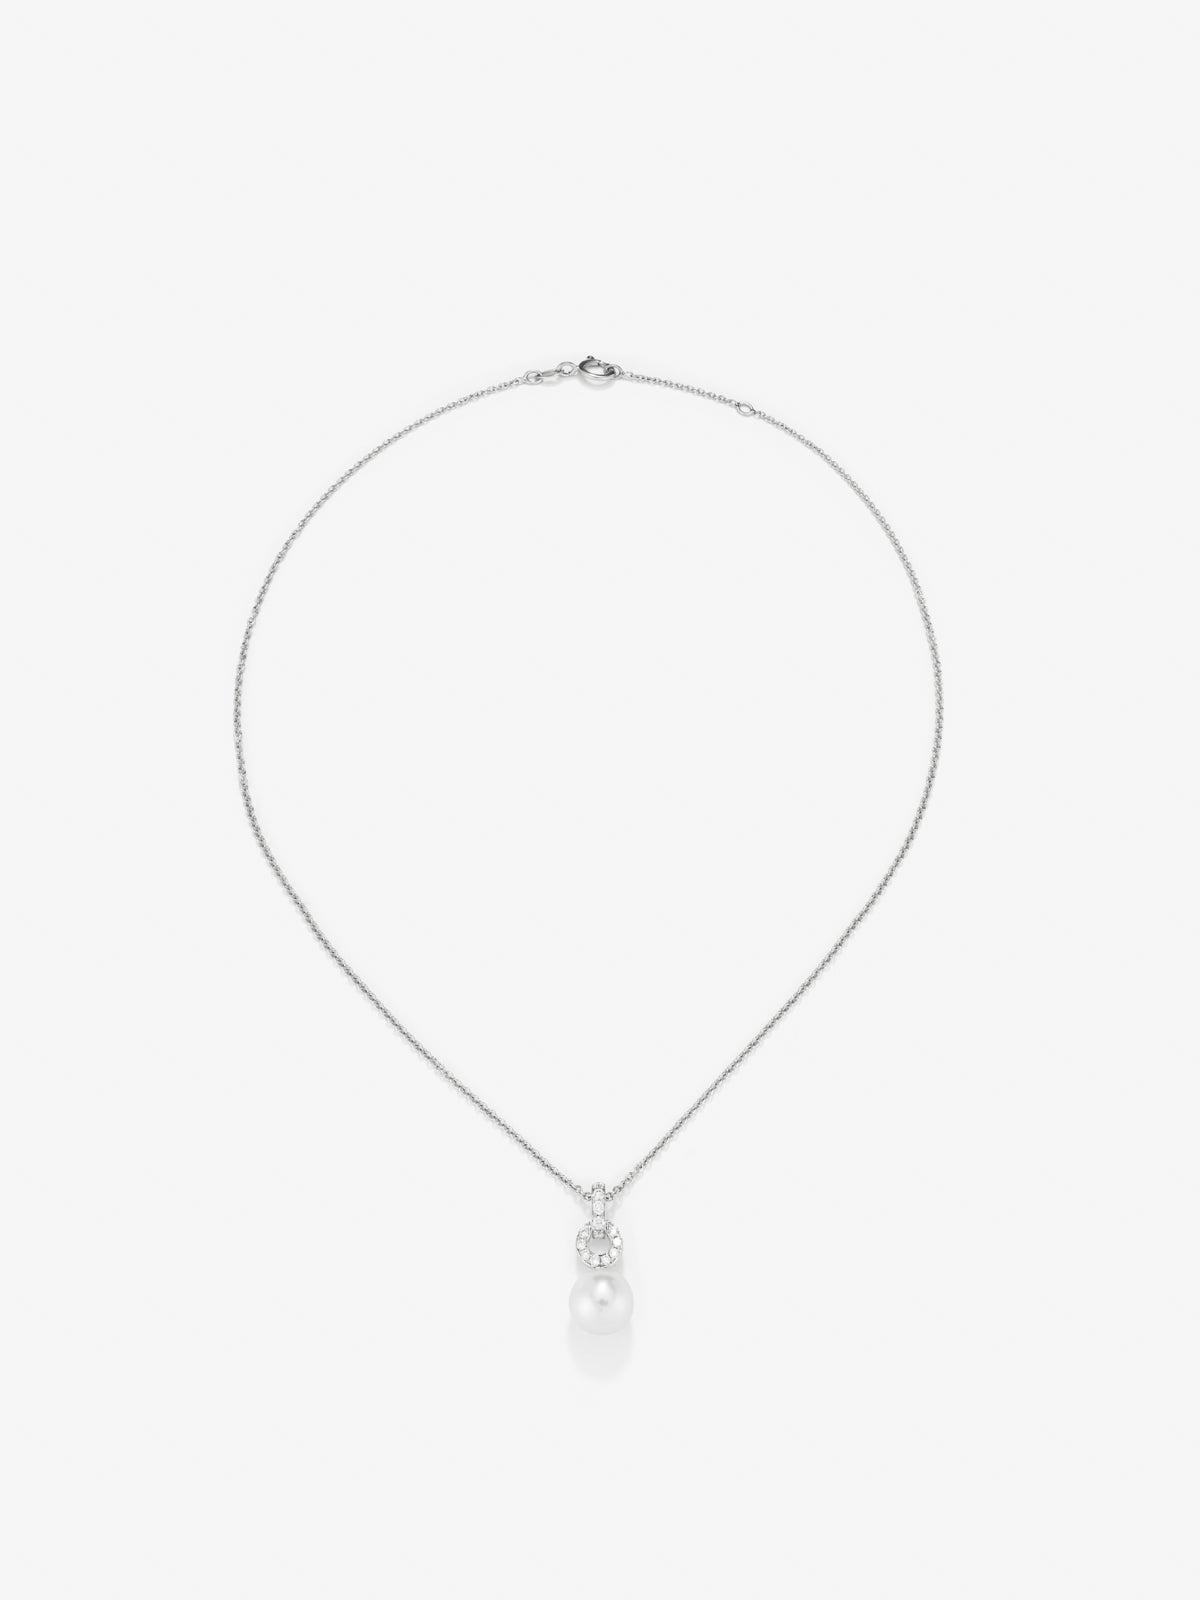 18k white gold chain pendant with a diamond hoop and 9.5mm Australian pearl